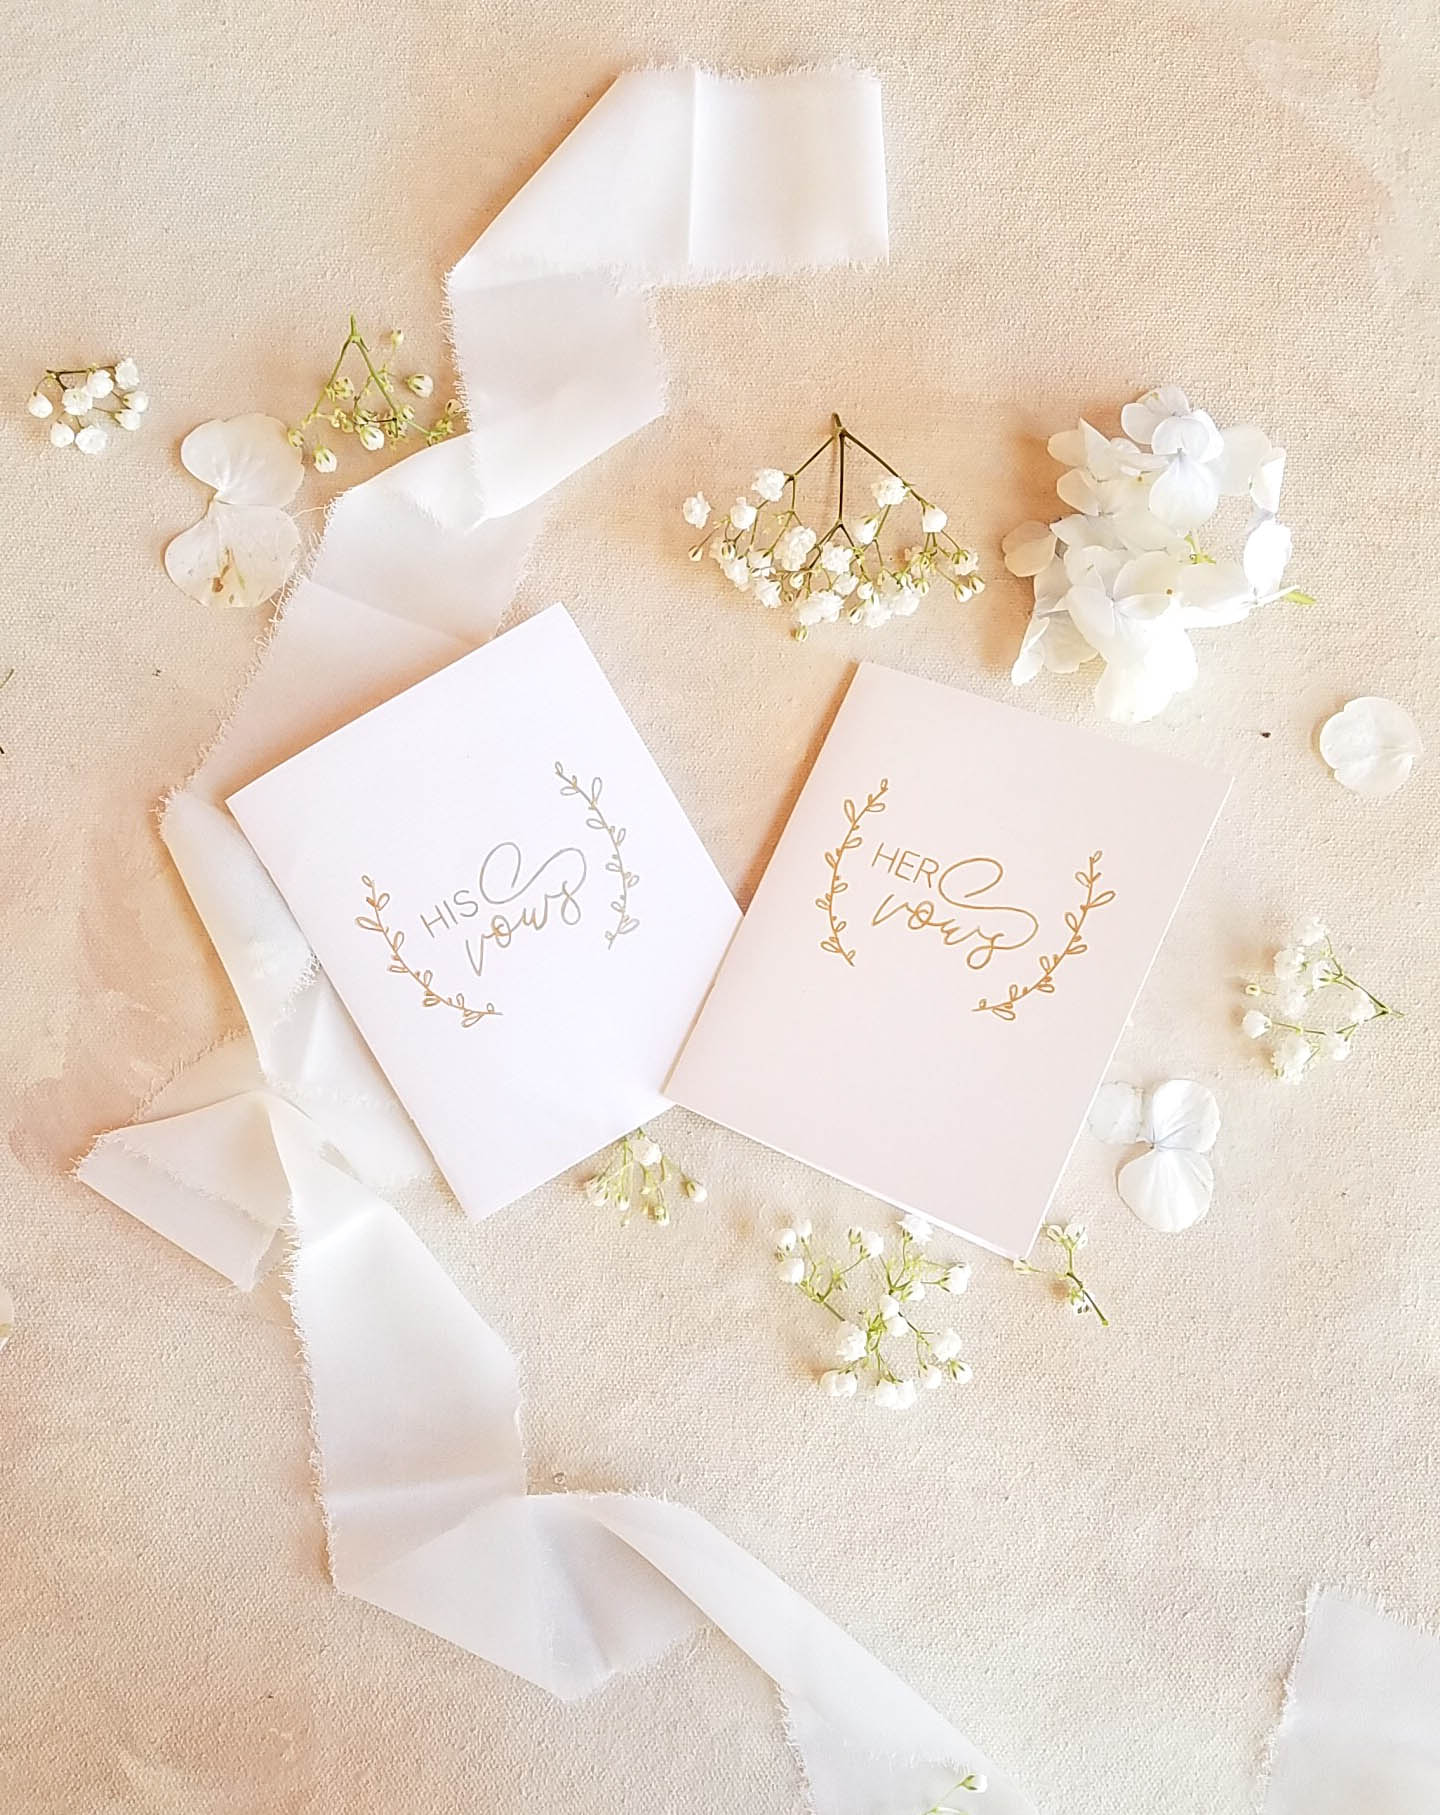 Stationery Shop | Amour Daydream Studio | Wedding and Events